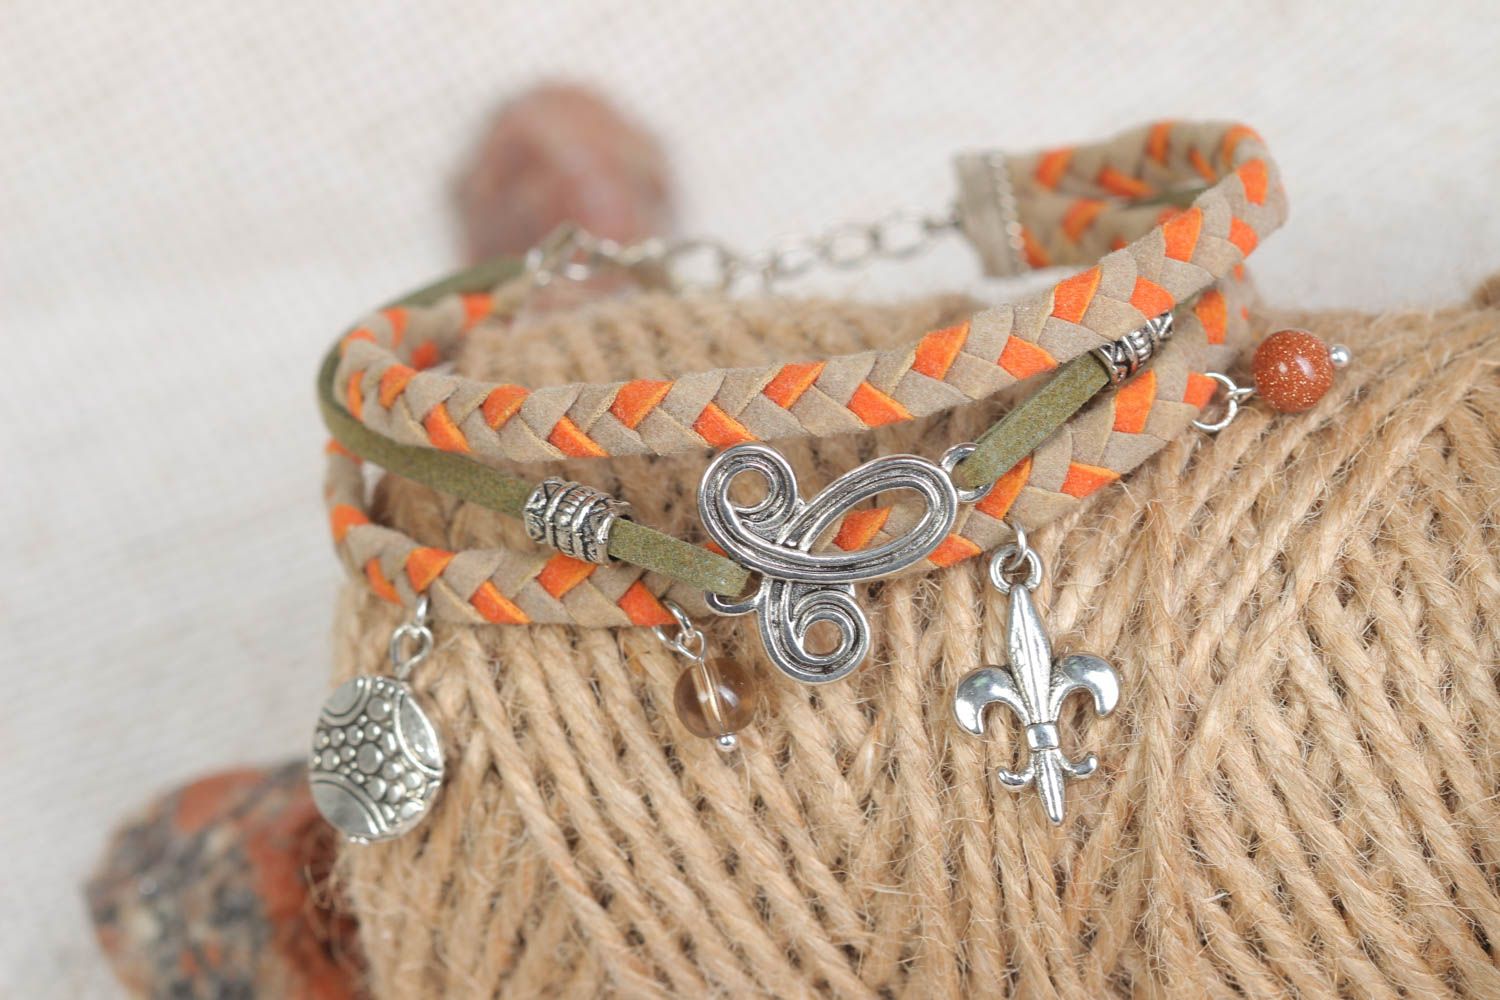 Handmade braided leather bracelet with metal charms fashion jewelry gift ideas photo 1